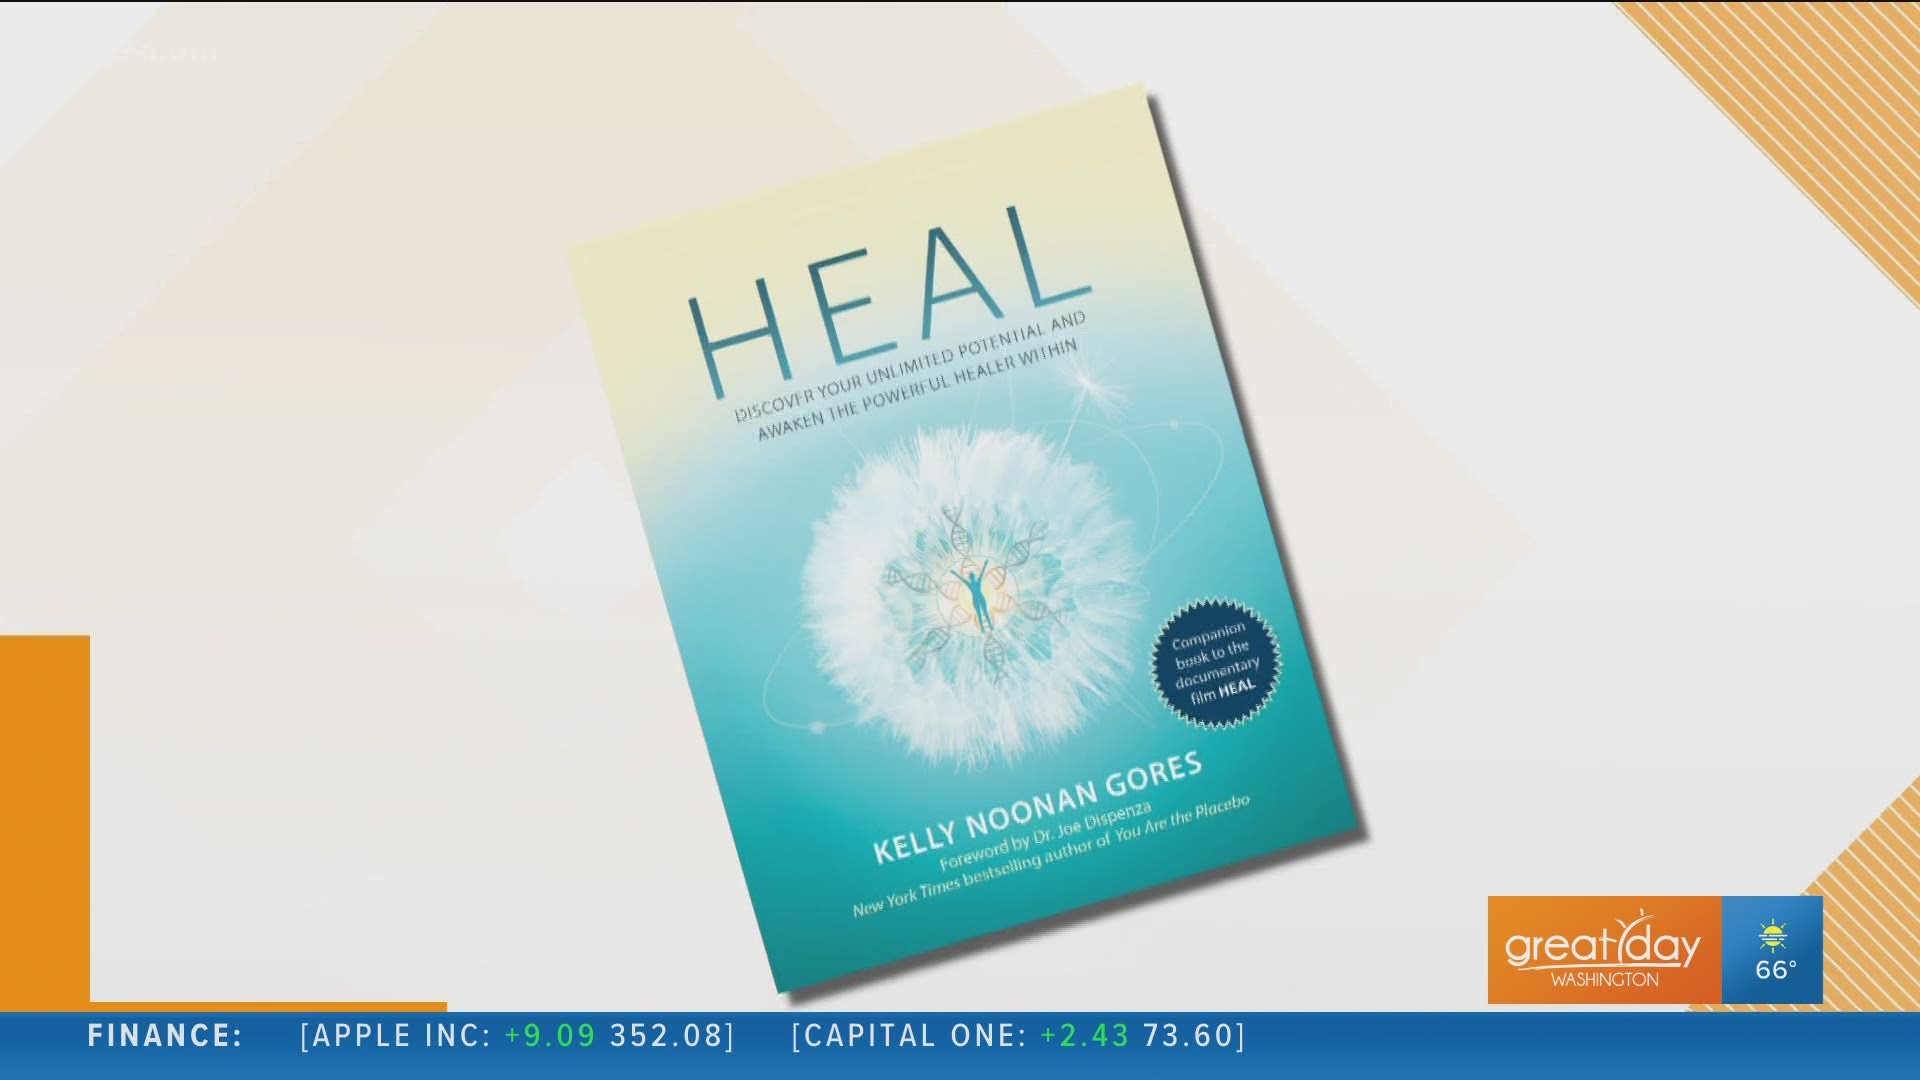 Author and director of the Netflix documentary "Heal," Kelly Noonan Gores shares tips on overcoming pain and making it work for you.